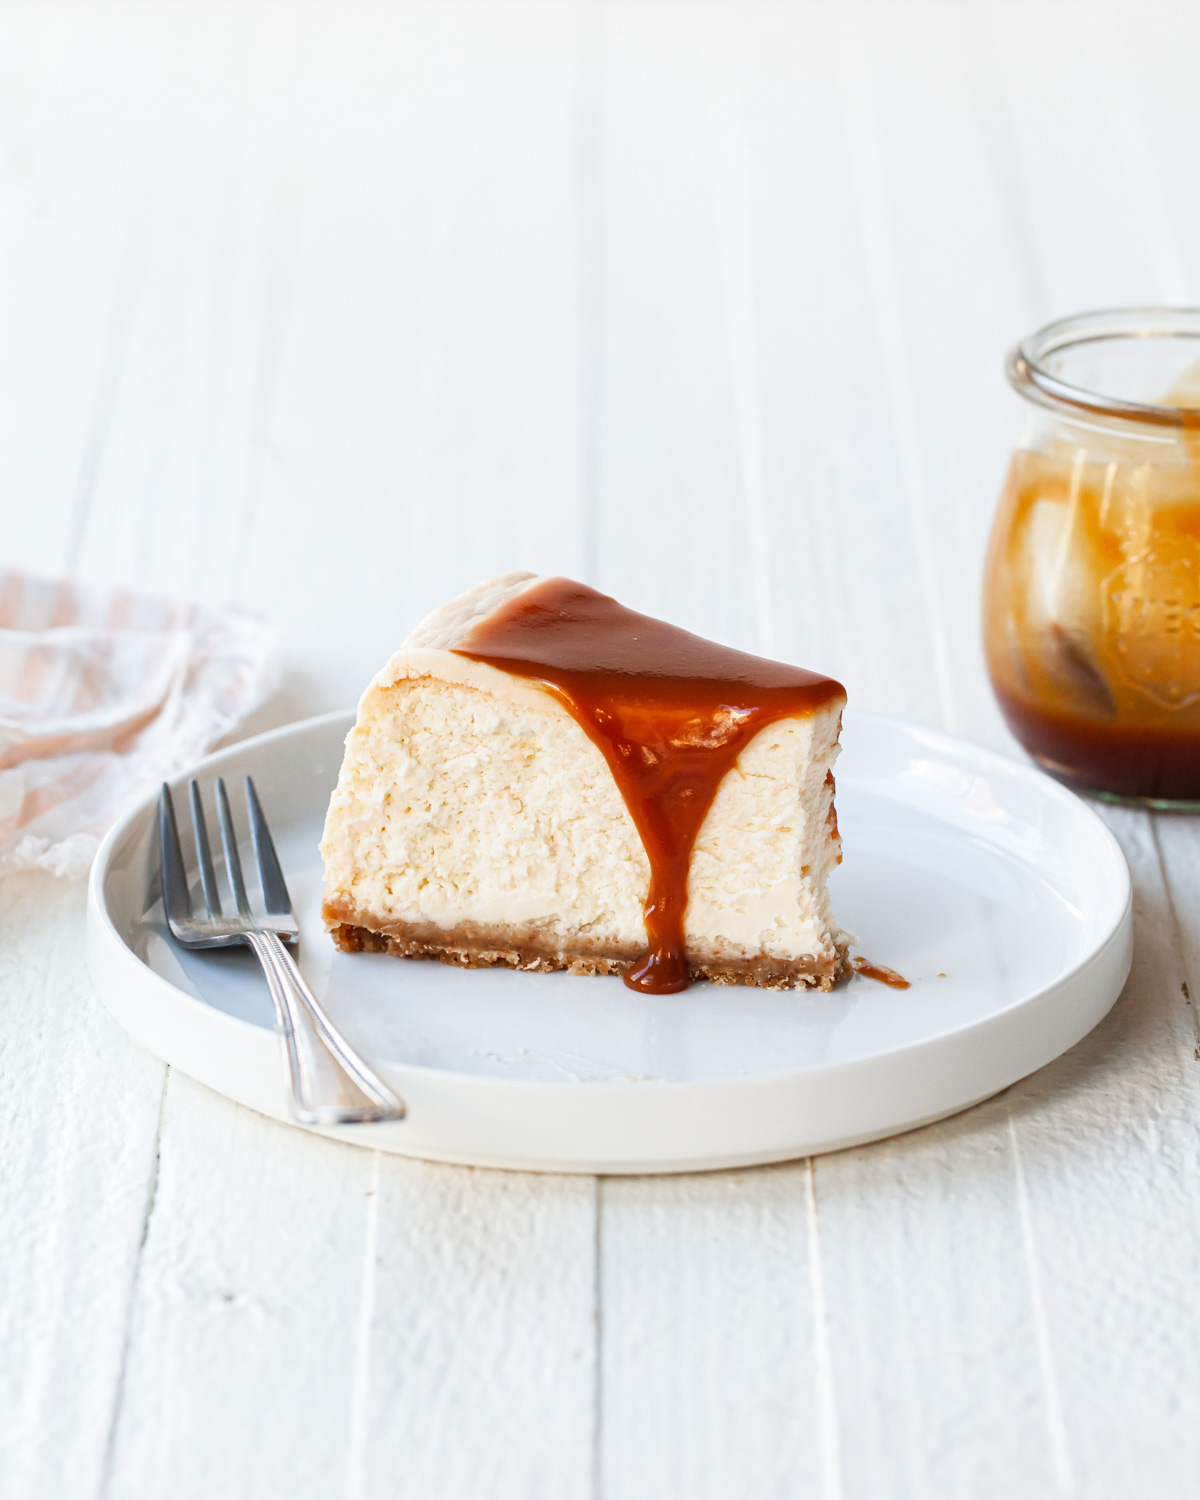 A slice of cheesecake with caramel sauce on top